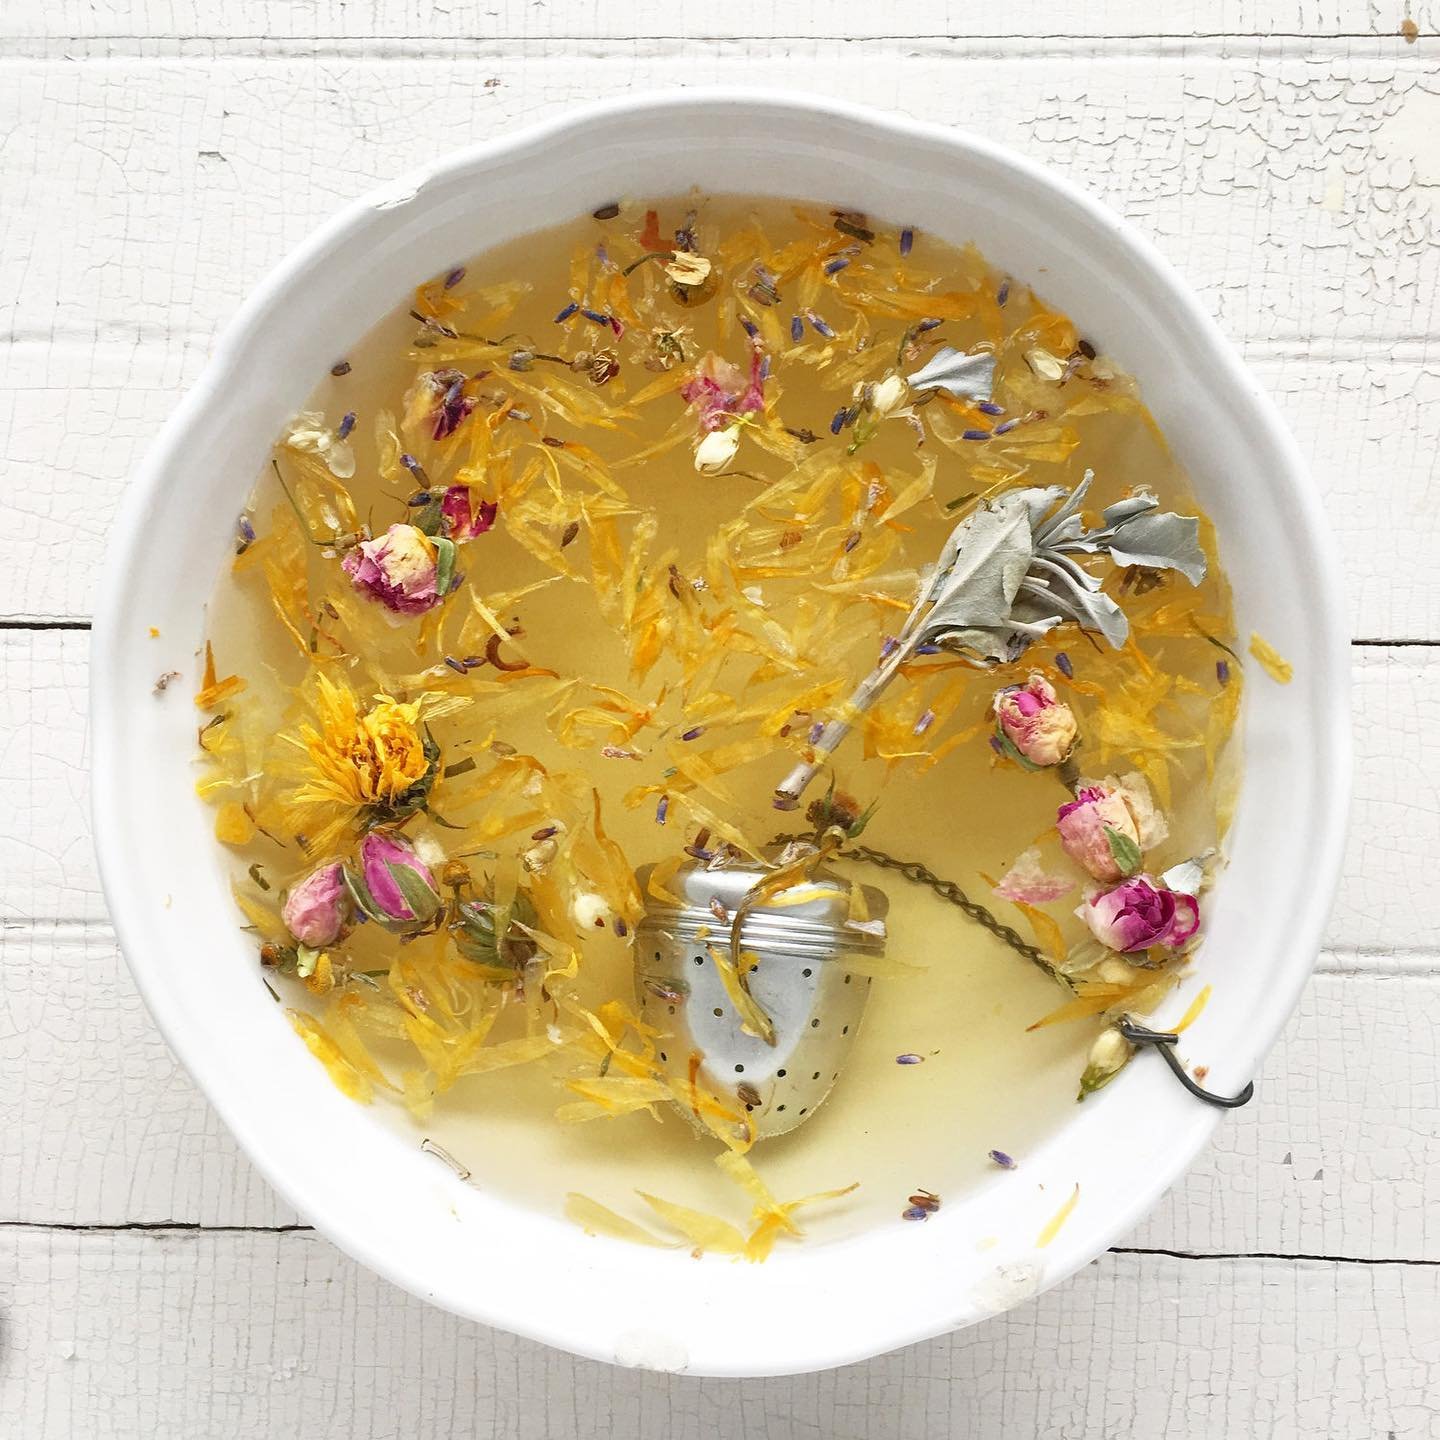 Who has tried the ice bath for your face from our April Healing Waters blog? Link in bio. 

If you want to take your cold plunge facial to the next level, try freezing a batch of our Gingermint Bathtub Tea into ice cubes 🌼

You can run a frozen cube